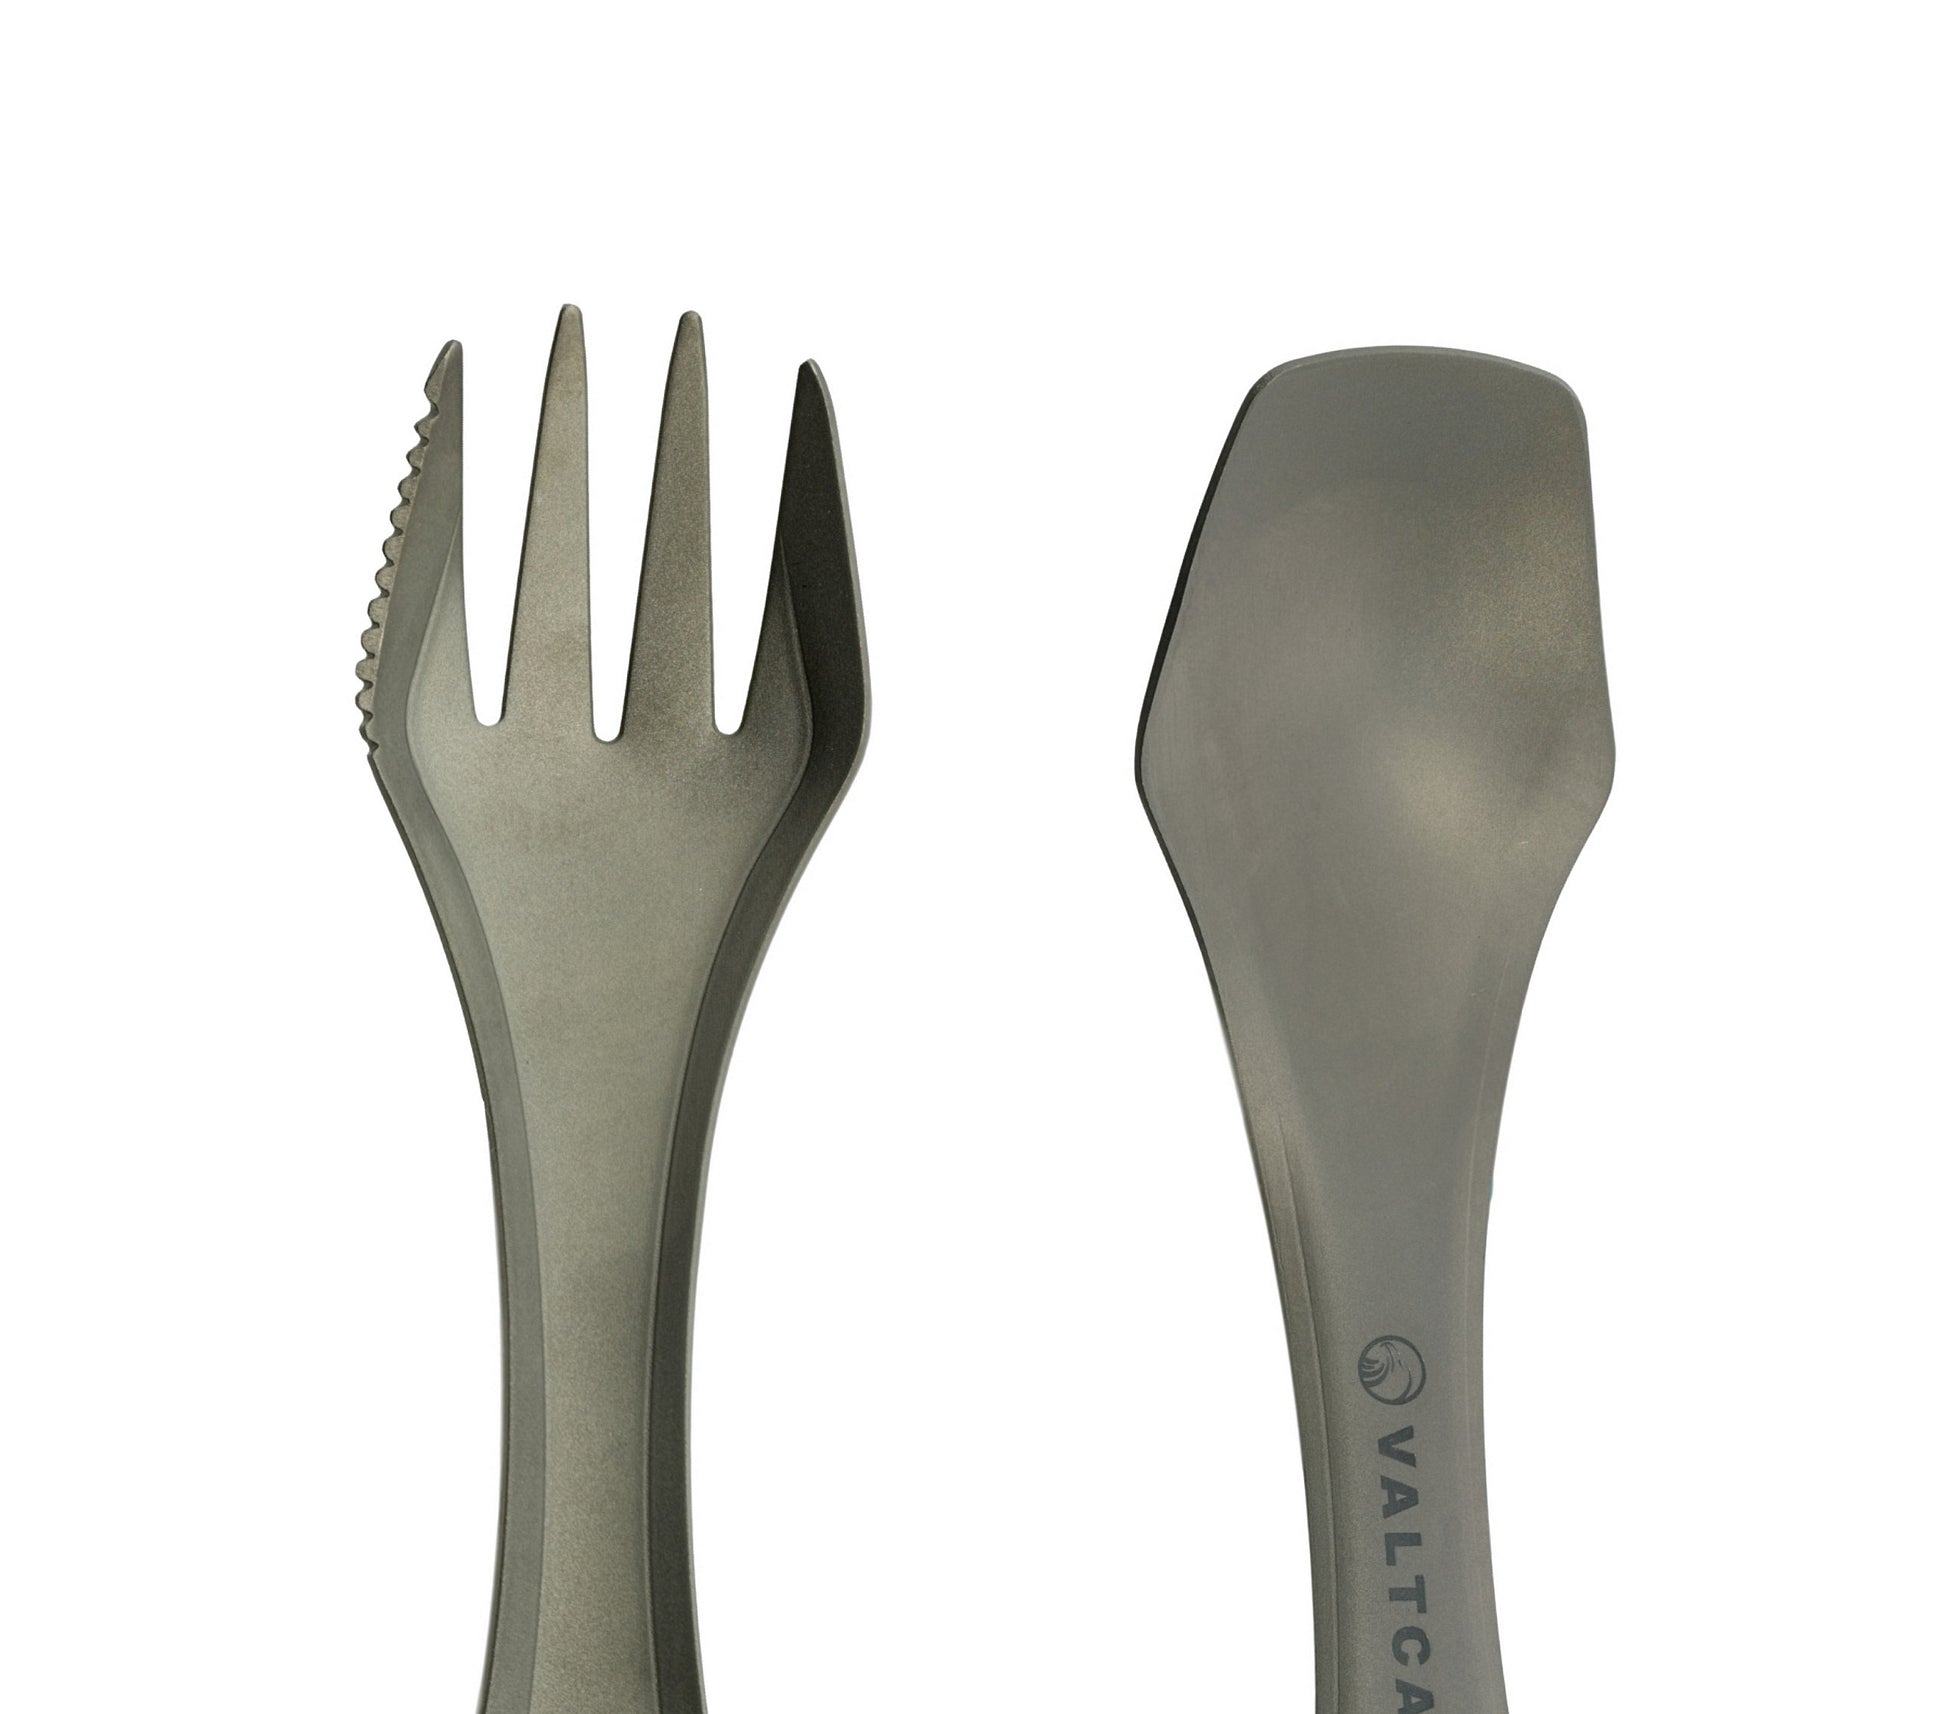 Valtcan Titanium Compact 3 Piece Utensil Fork Spoon Knife Ultralight Carry Military Design System